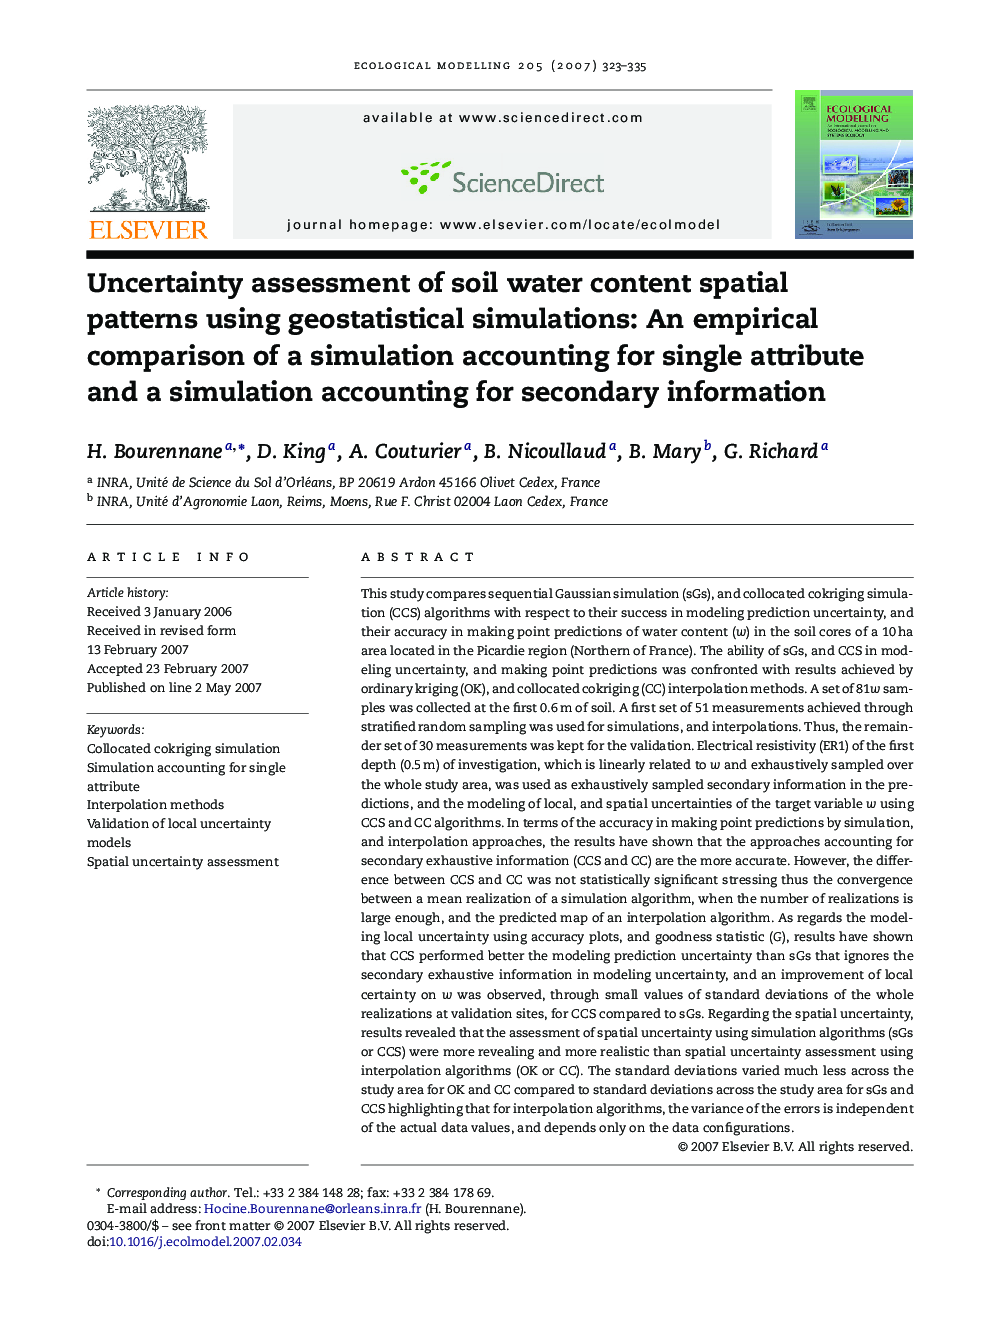 Uncertainty assessment of soil water content spatial patterns using geostatistical simulations: An empirical comparison of a simulation accounting for single attribute and a simulation accounting for secondary information